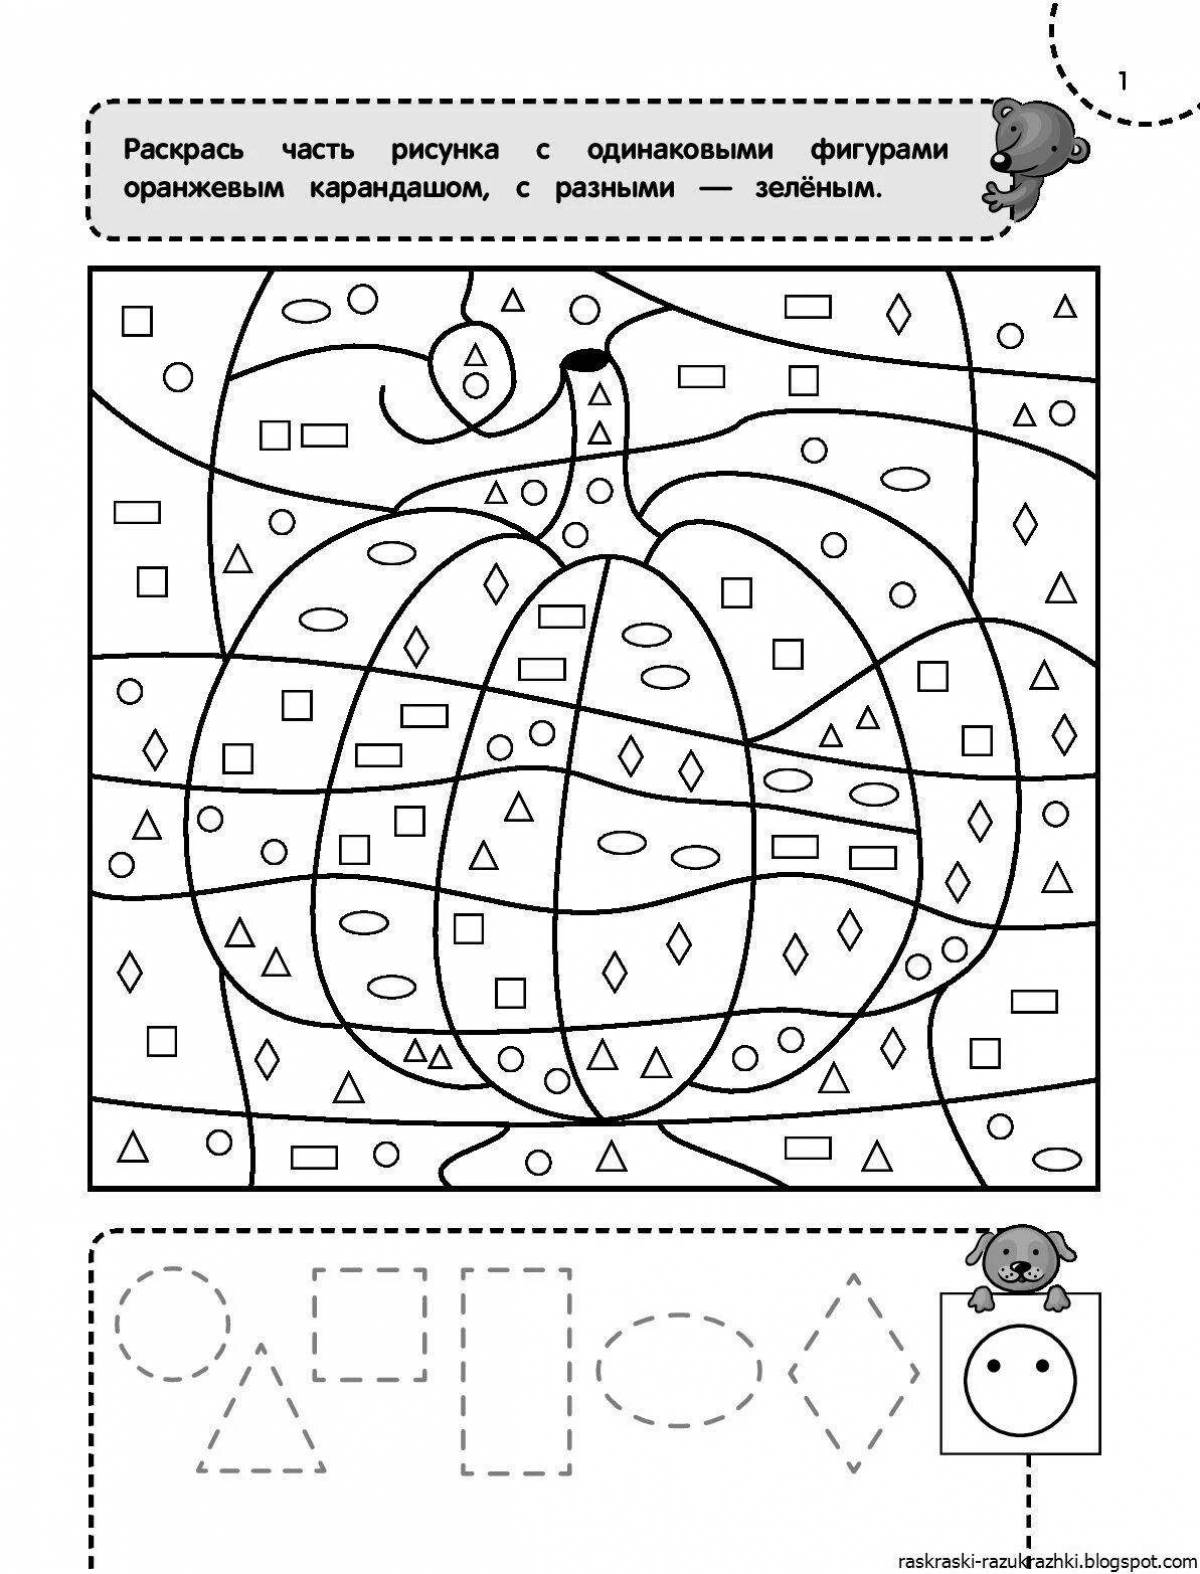 Creative puzzle coloring book for 6-7 year olds